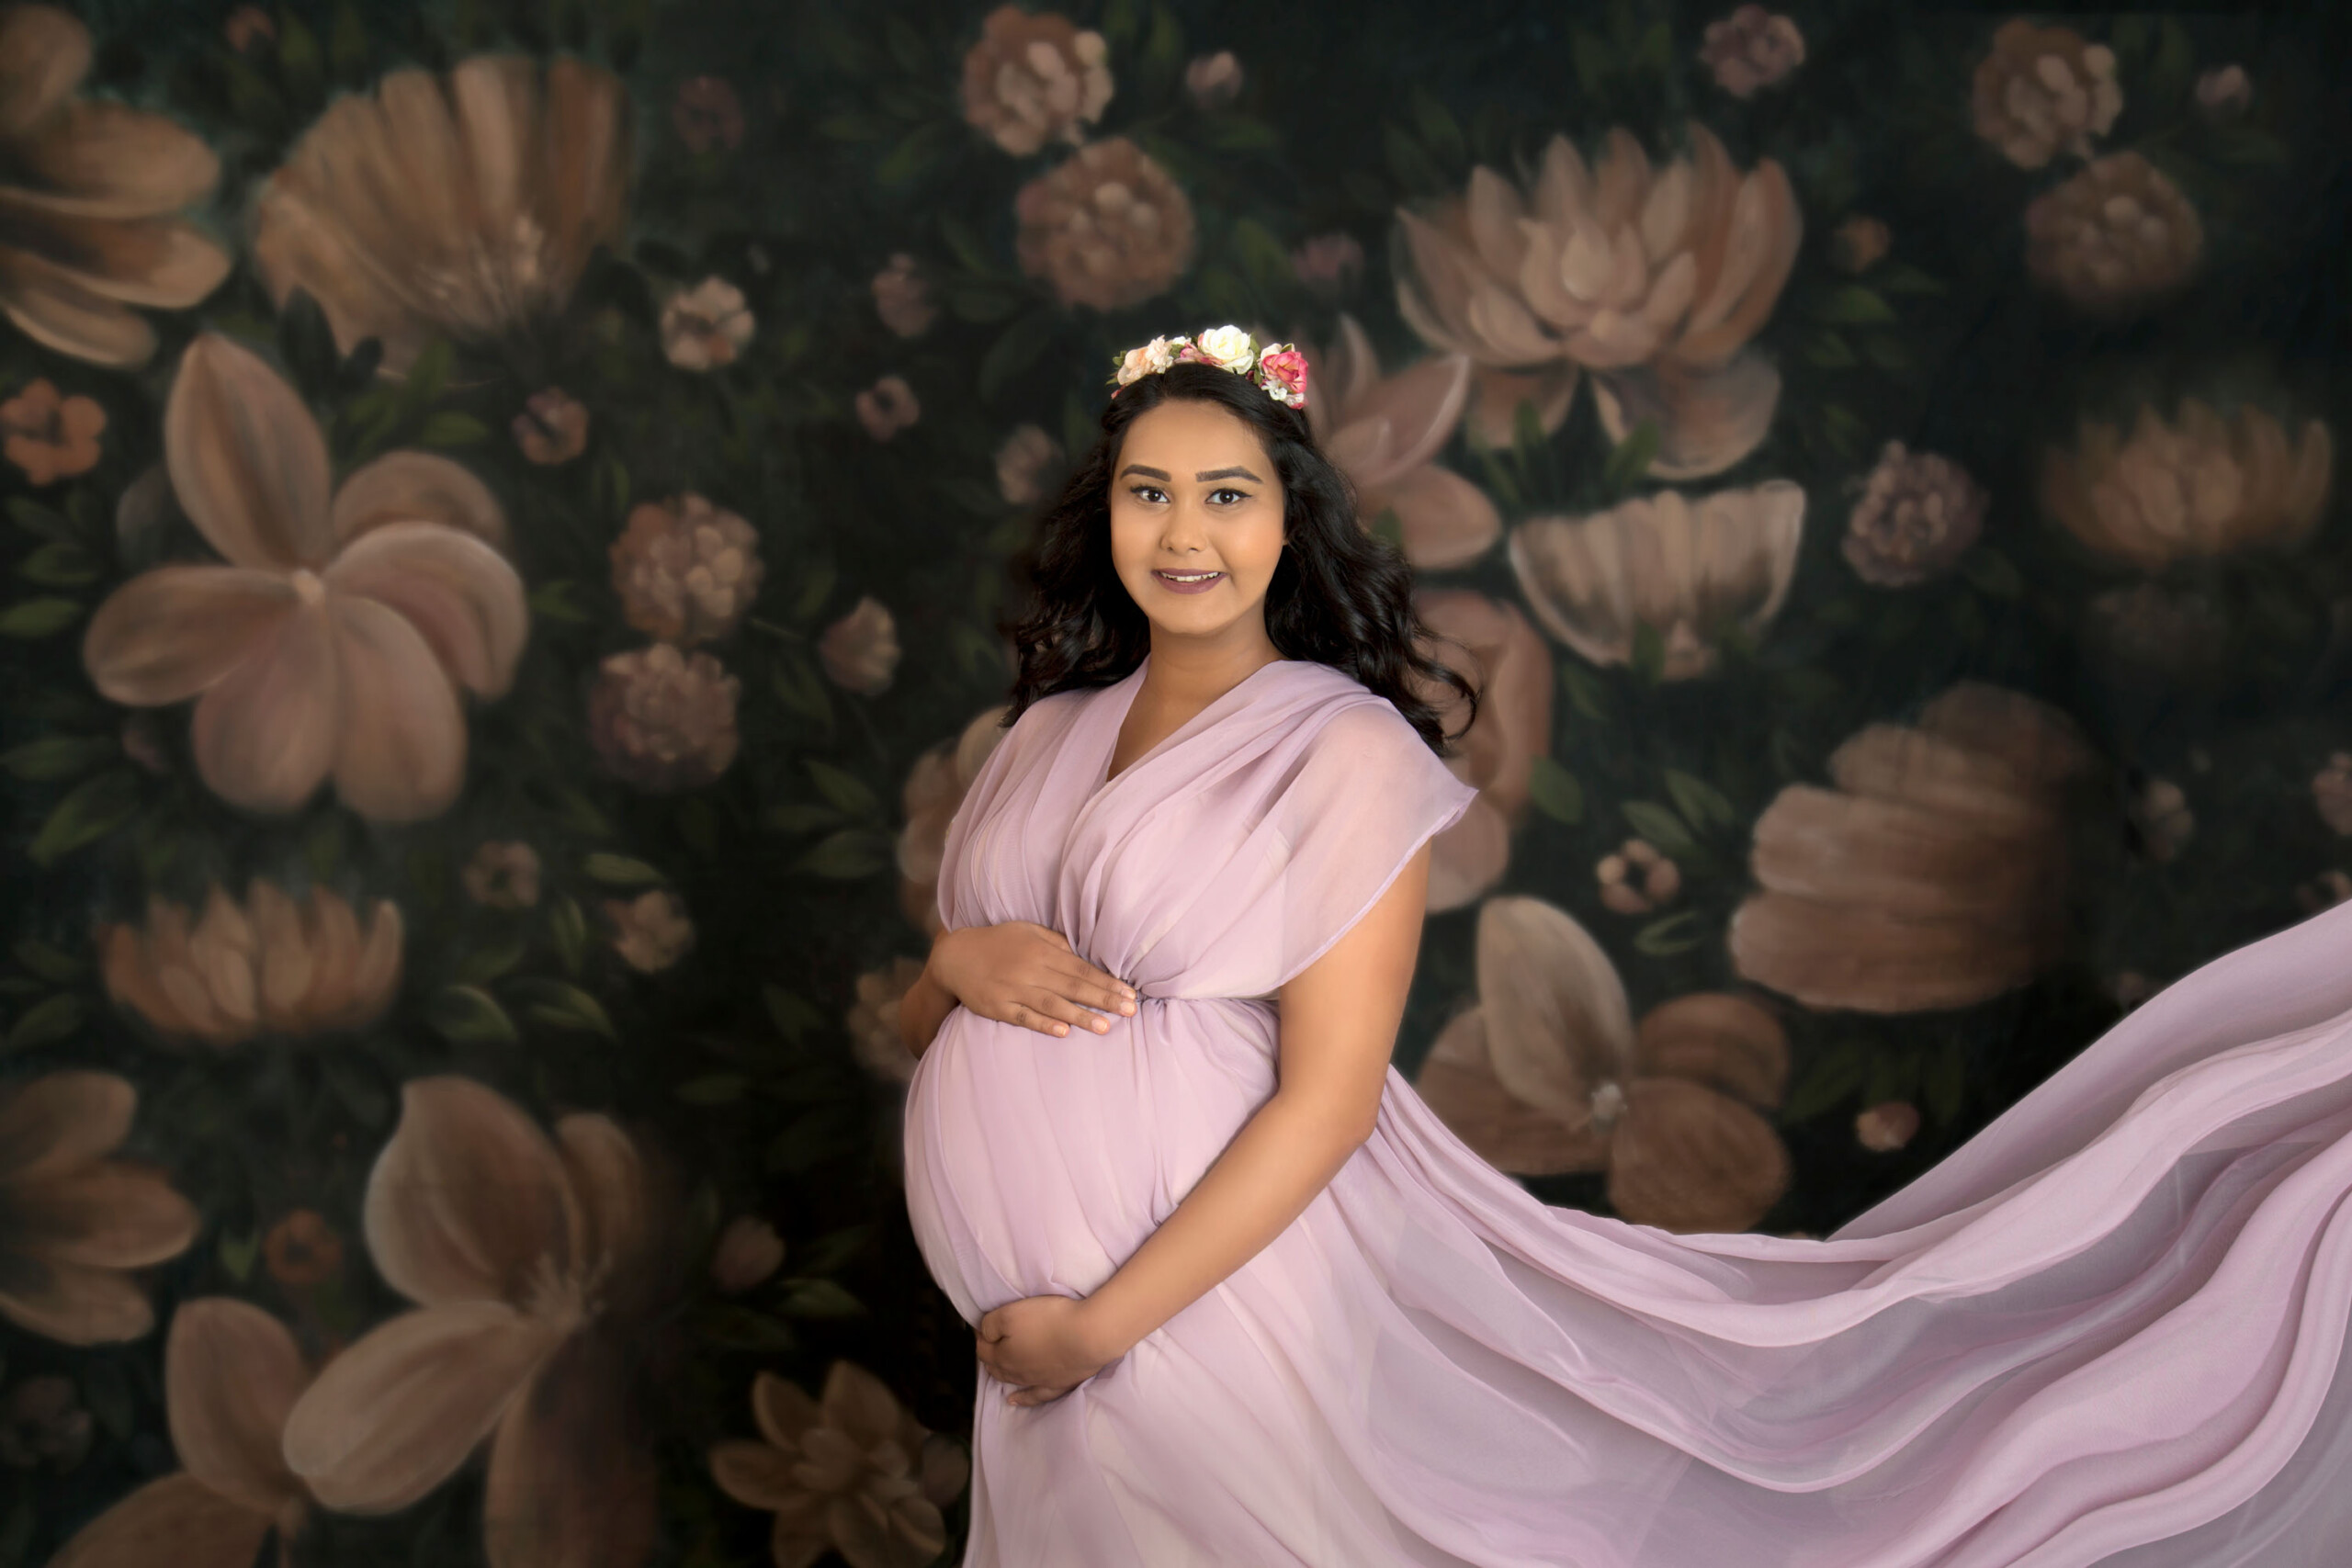 https://artinphotography.ca/wp-content/uploads/artin-maternity-photography-gallery-vancouver-0123-scaled.jpg